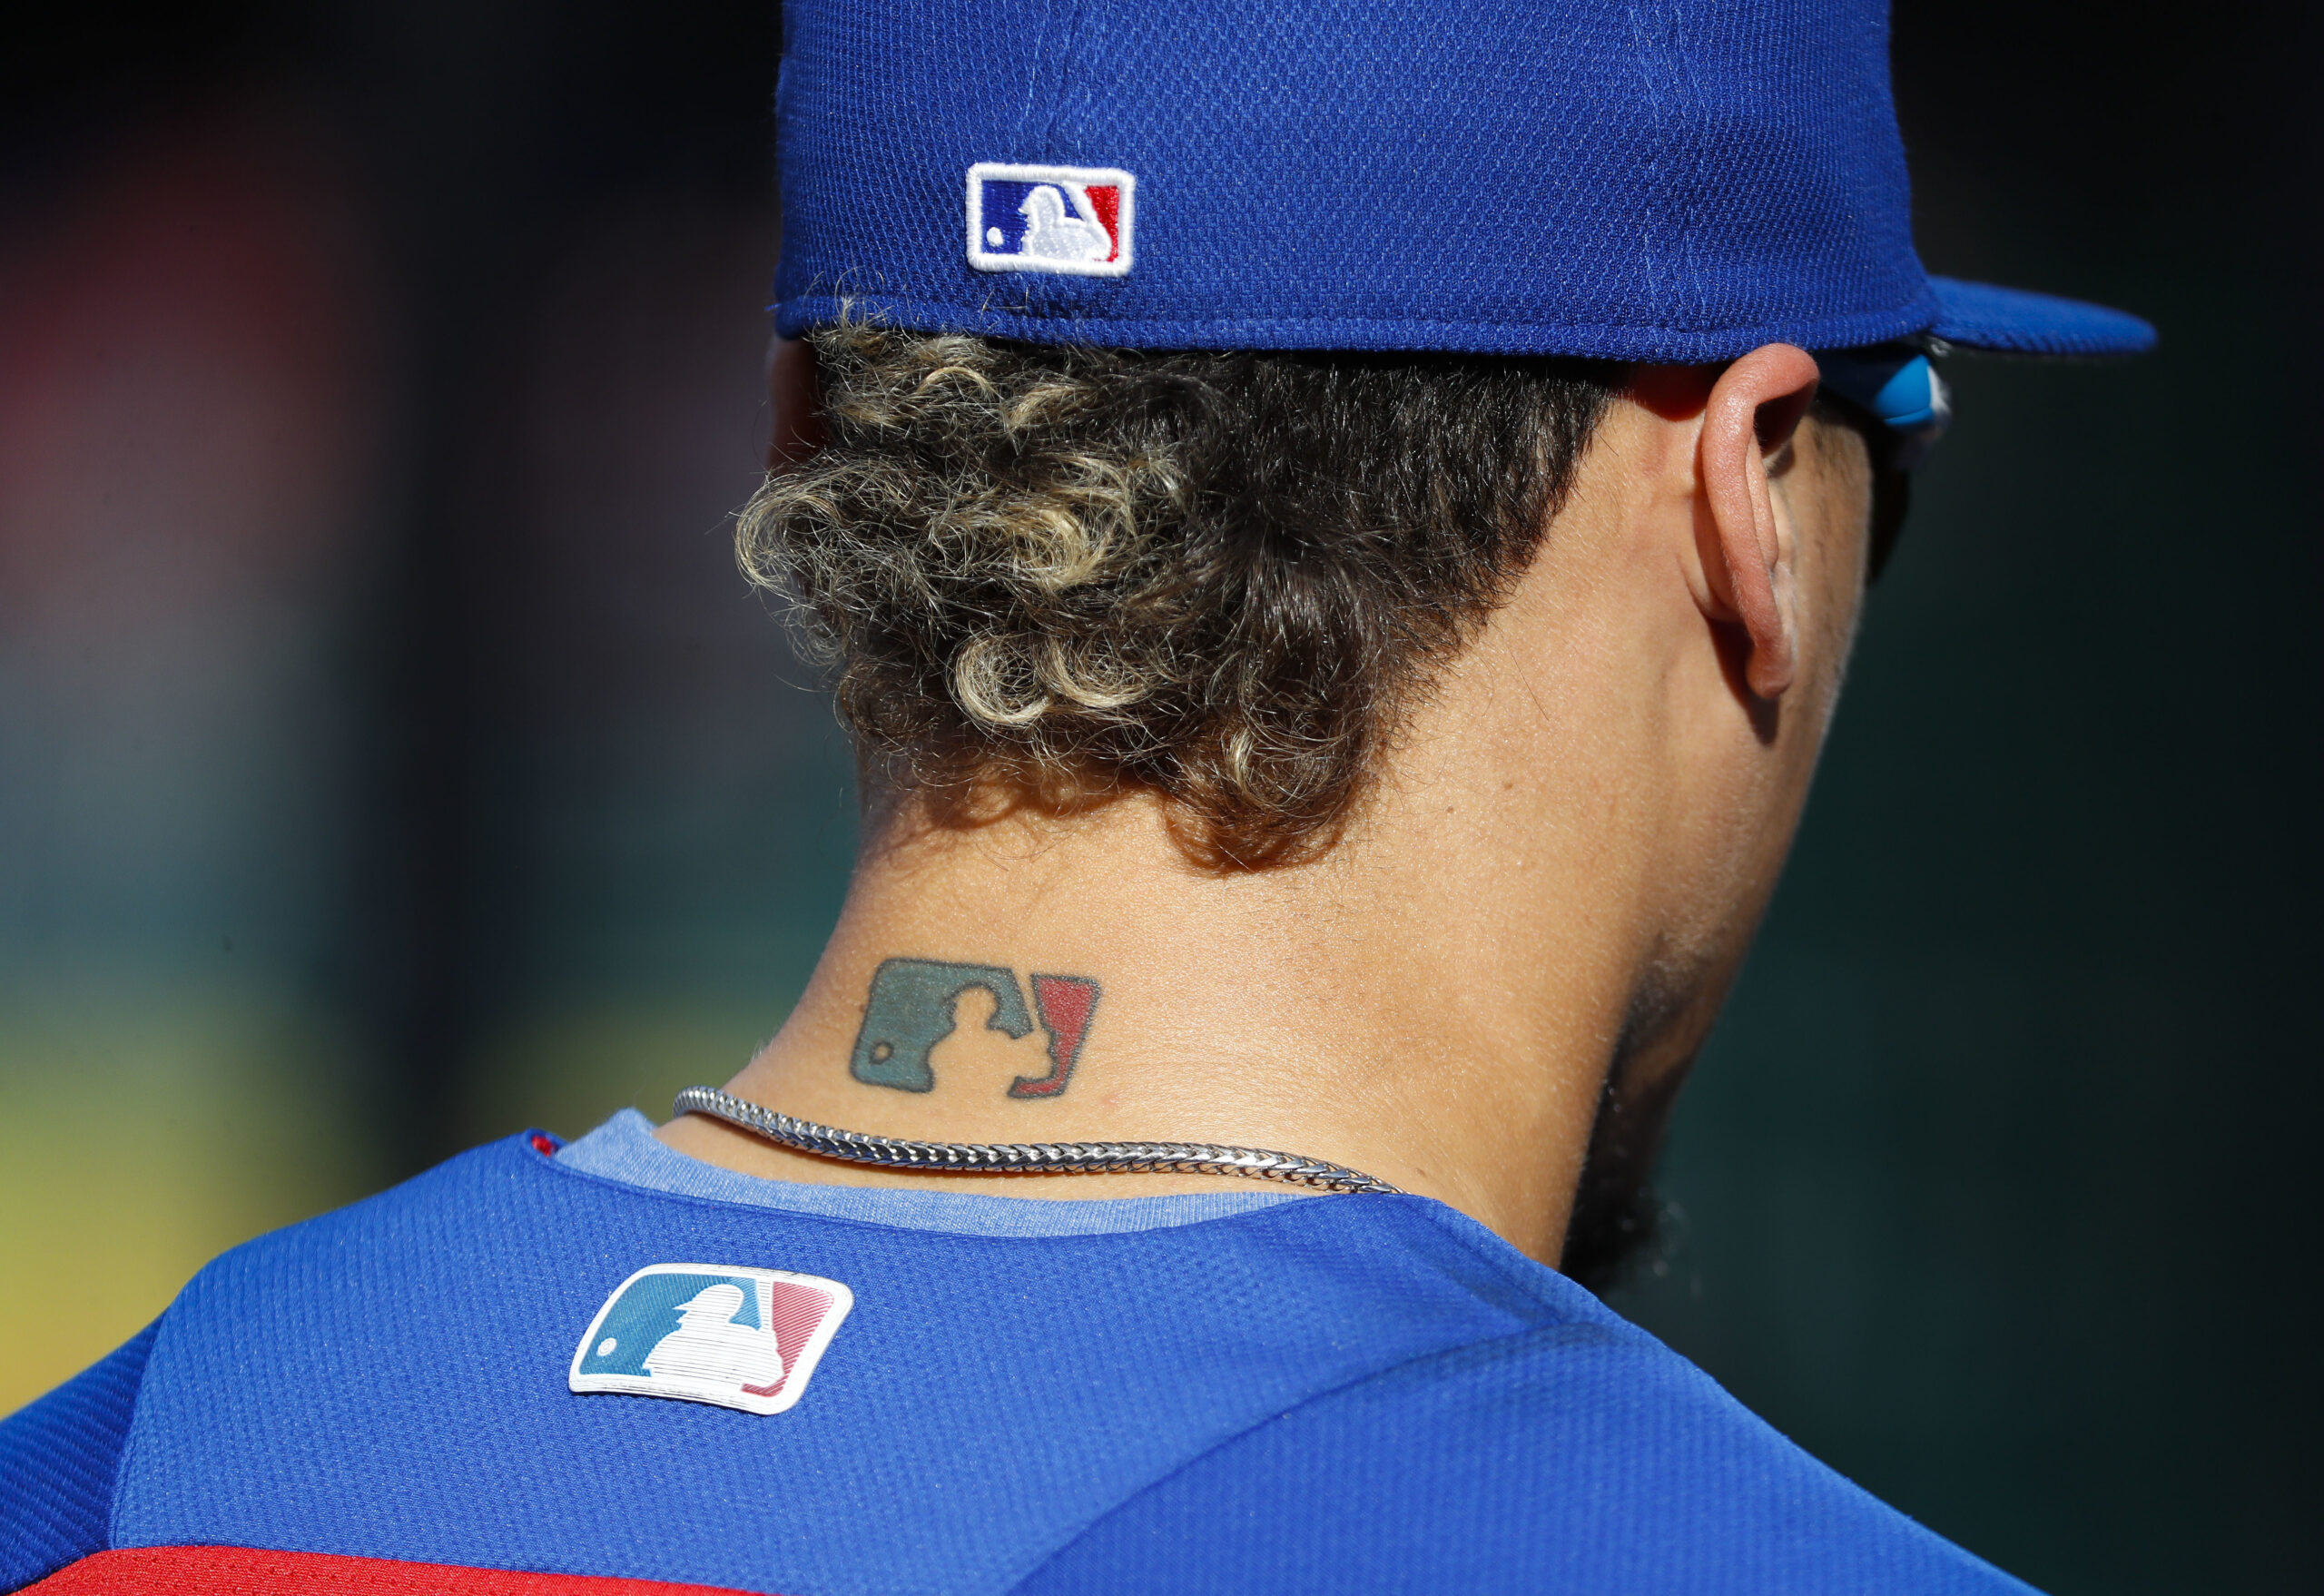 FILE - Then-Chicago Cubs' Javier Baez sports an MLB logo tattoo and logos on his hat and jersey as he waits to take batting practice before Game 2 of baseball's National League Division Series against the Washington Nationals at Nationals Park, Saturday, Oct. 7, 2017, in Washington. The clock ticked down toward the expiration of Major League Baseball’s collective bargaining agreement at 11:59 p.m. EST Wednesday night, Dec. 1, 2021, and what was likely to be a management lockout ending the sport’s labor peace at over 26 1/2 years. (AP Photo/Pablo Martinez Monsivais, File)